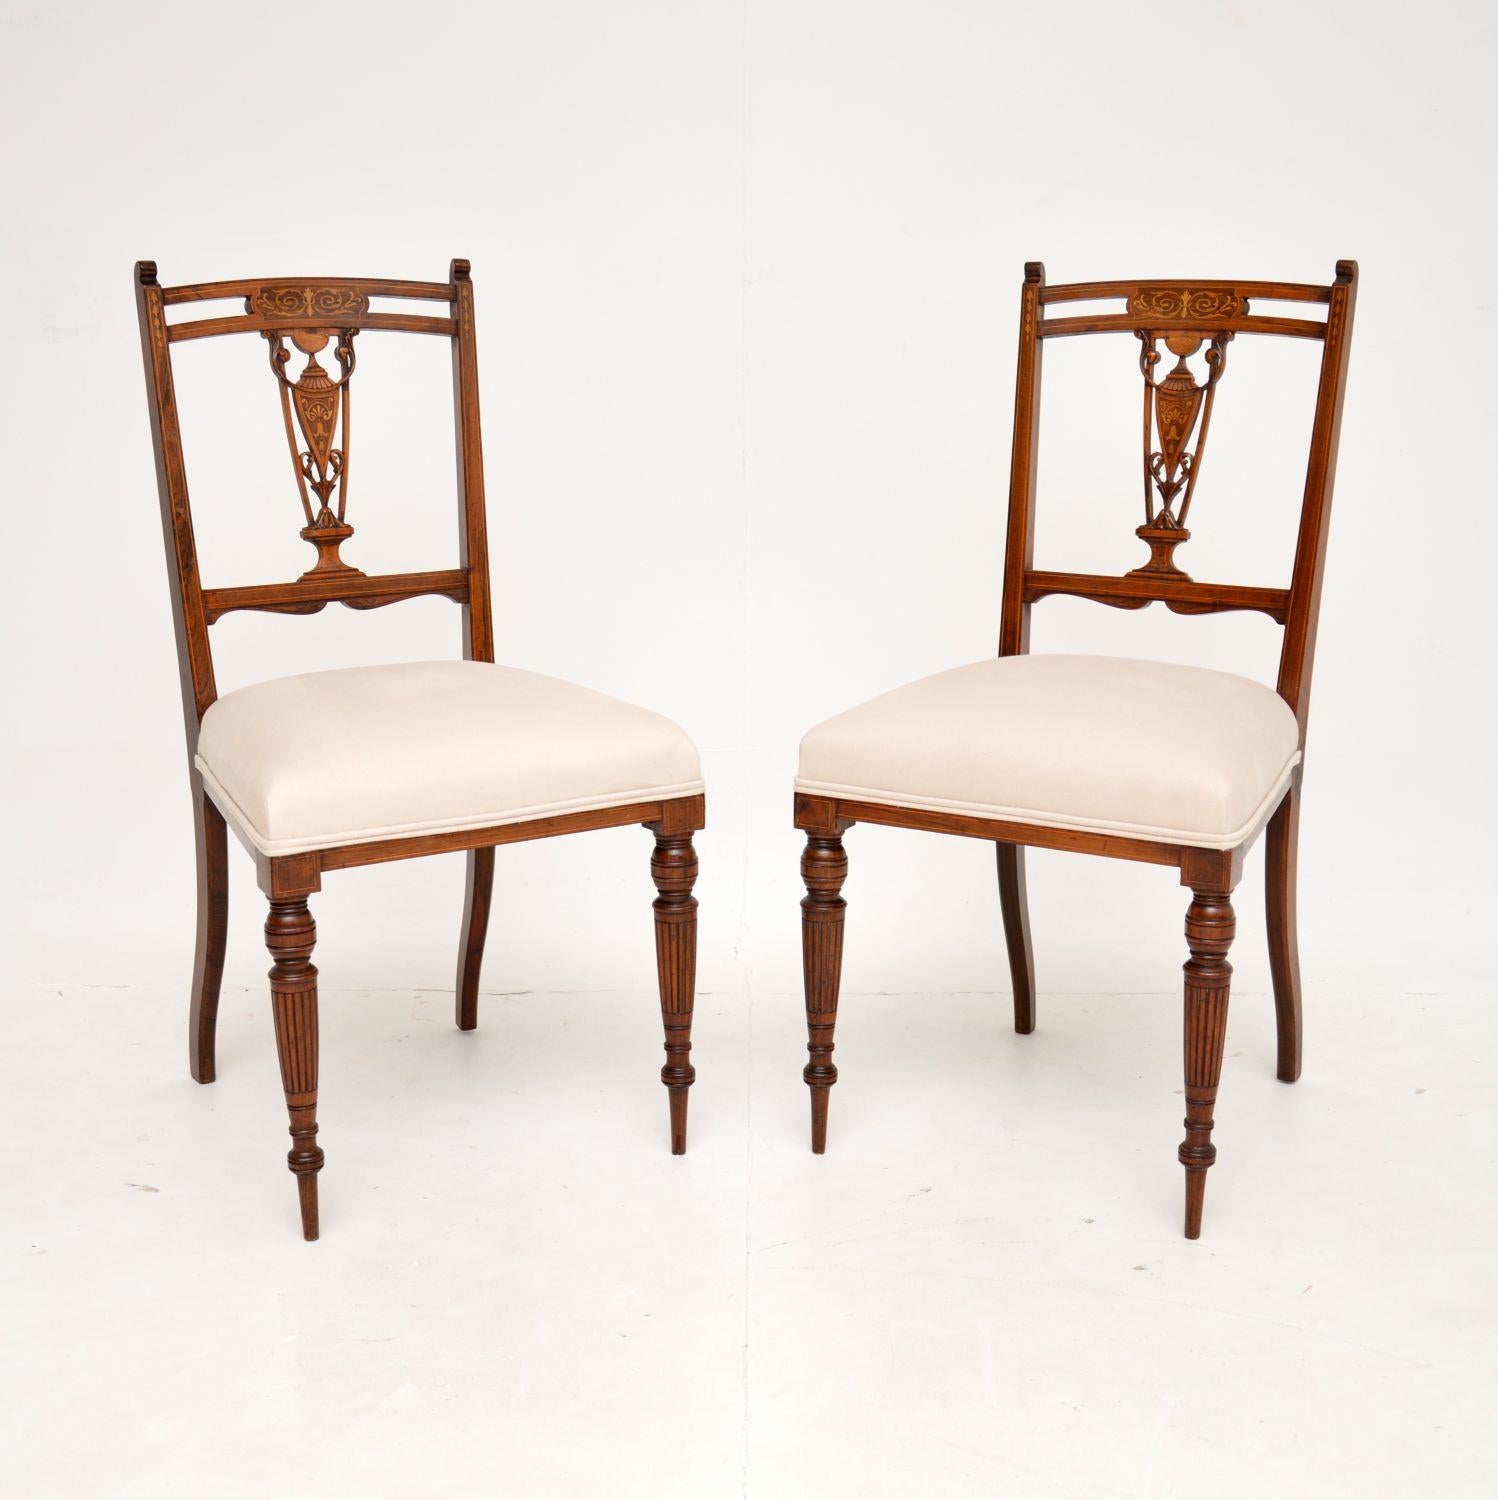 A stunning pair of antique Victorian side chairs, beautifully made from wood. They were made in England, and date from around the 1880-1890 period.

The quality is fantastic, they have incredibly fine carving on the pierced backs and the front